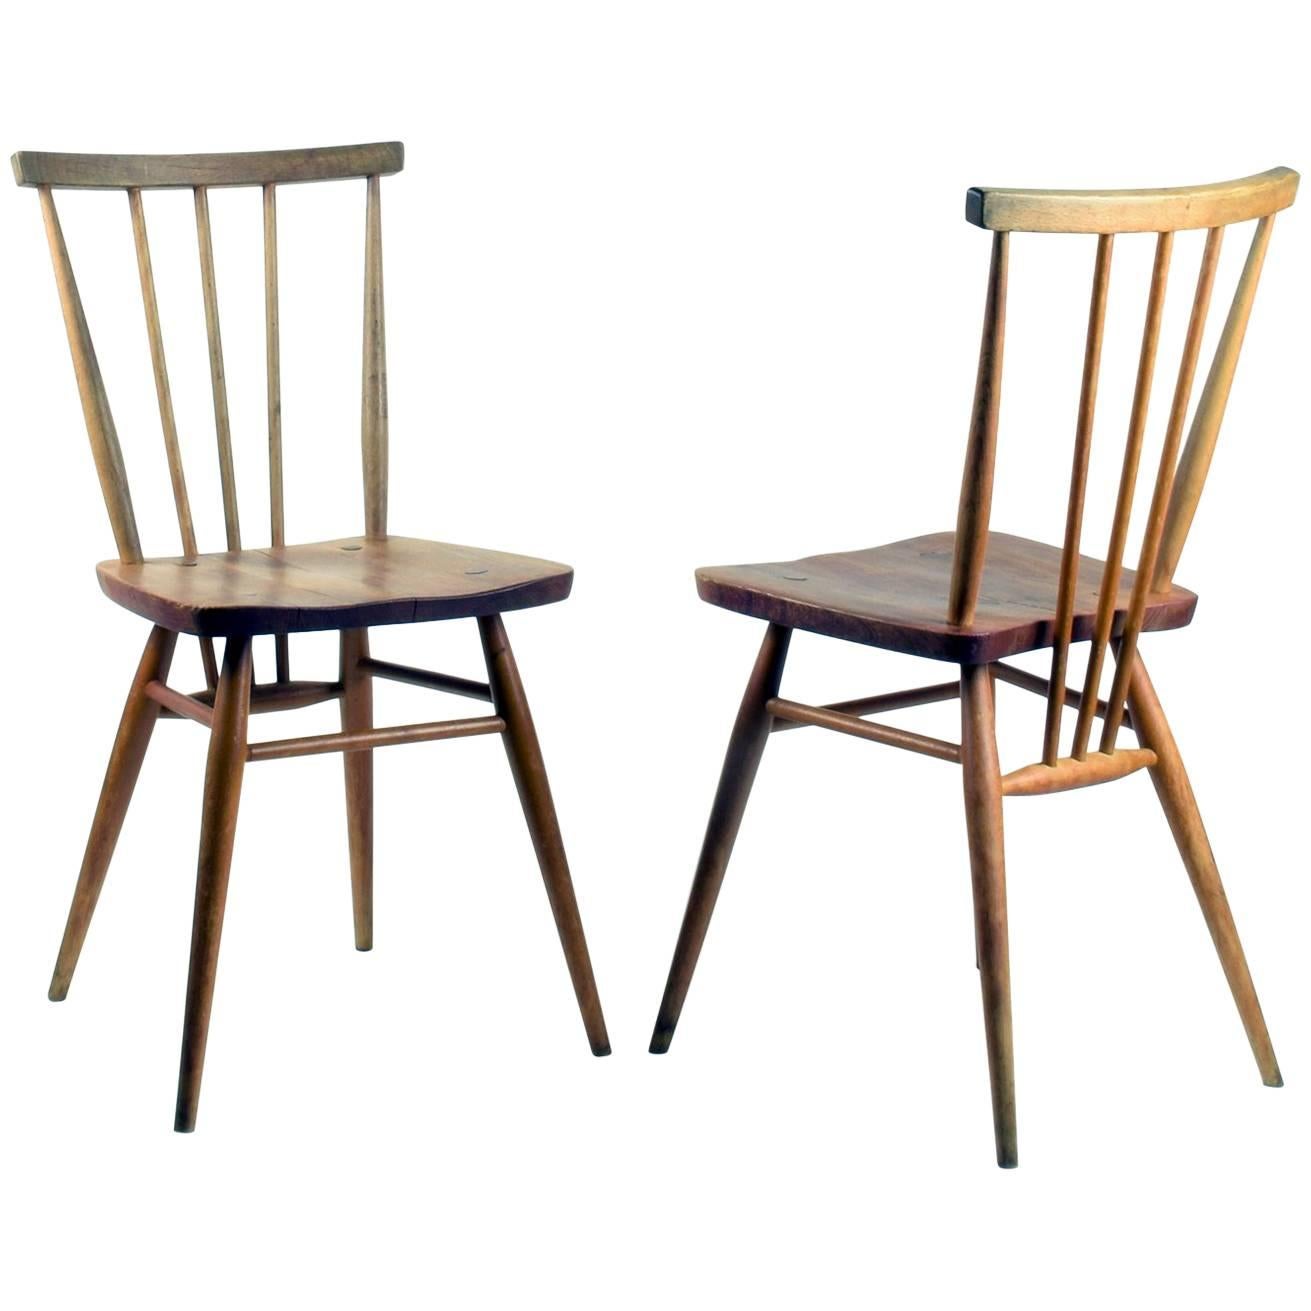 Ercol Chairs, Pair of Classic English Midcentury 'Windsor' Chairs, Model 391